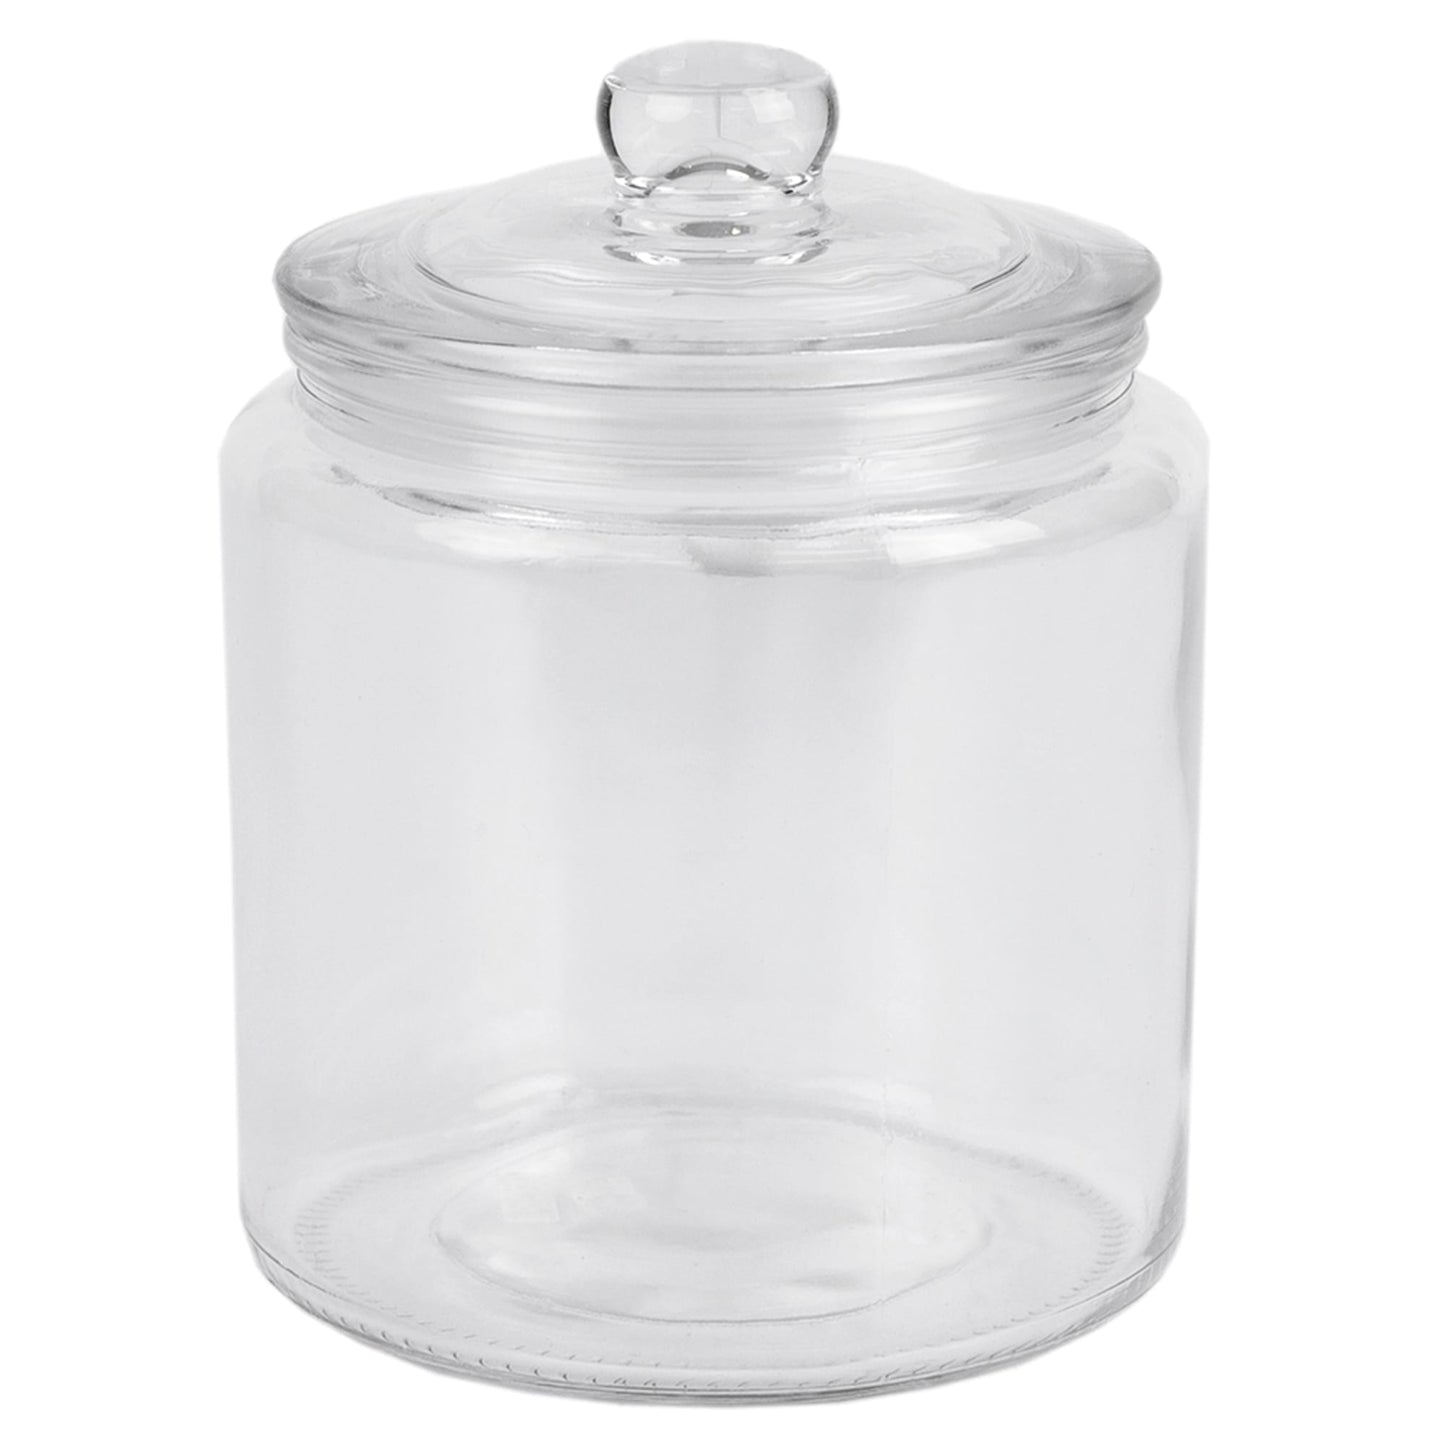 Renaissance Collection Small 1 Lt Glass Jar with Easy Grab Knob Handles, Clear